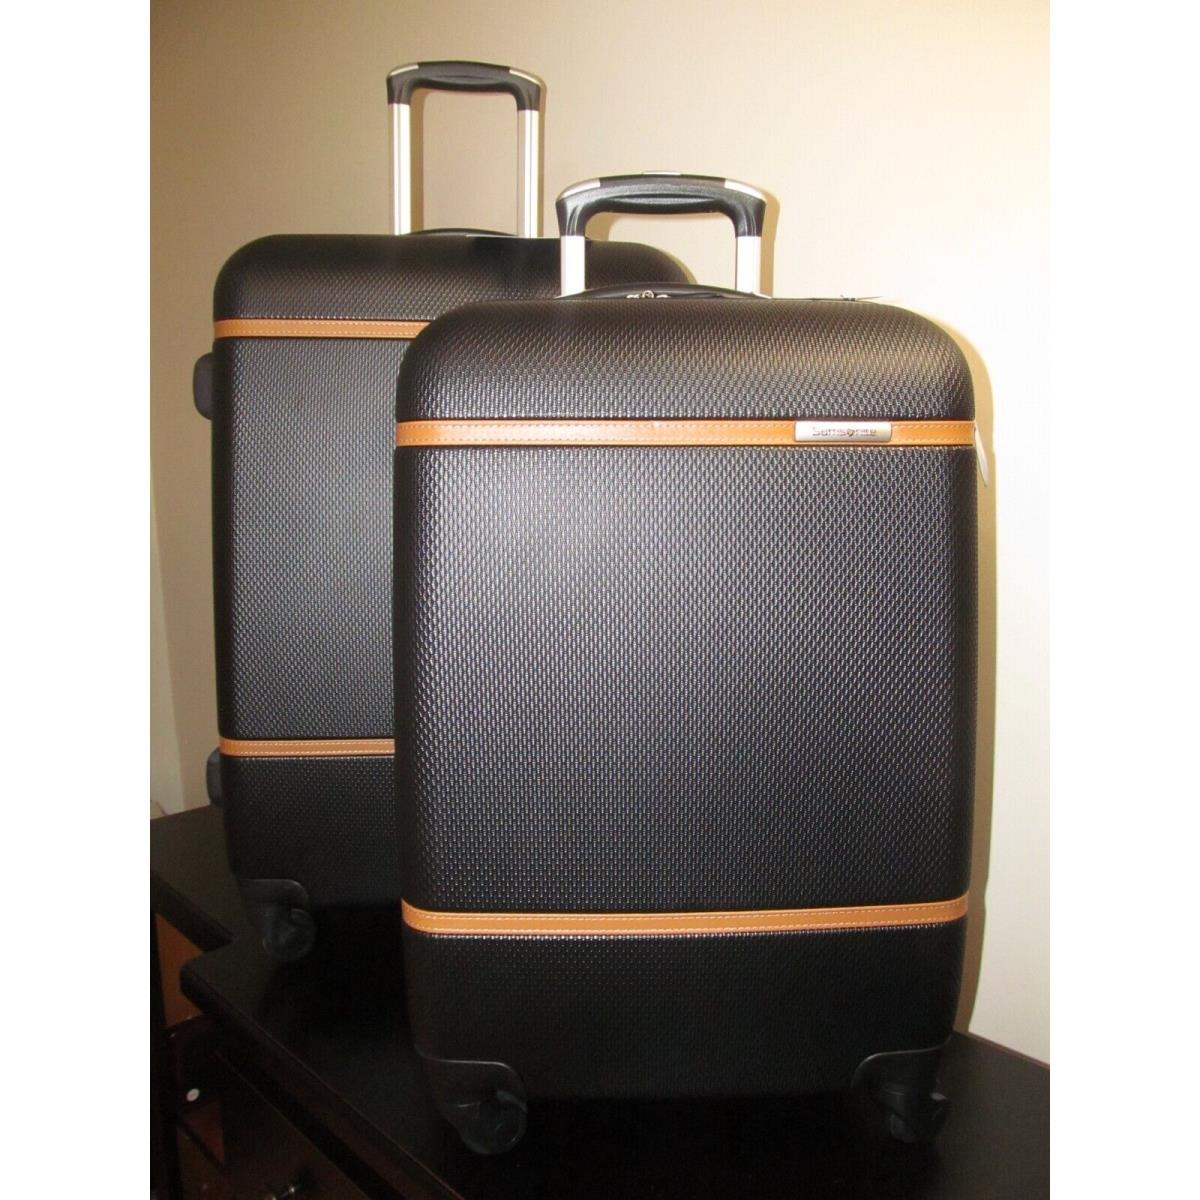 Samsonite Luggage Set-black with British Saddle Accents Carry On Check In-nwt